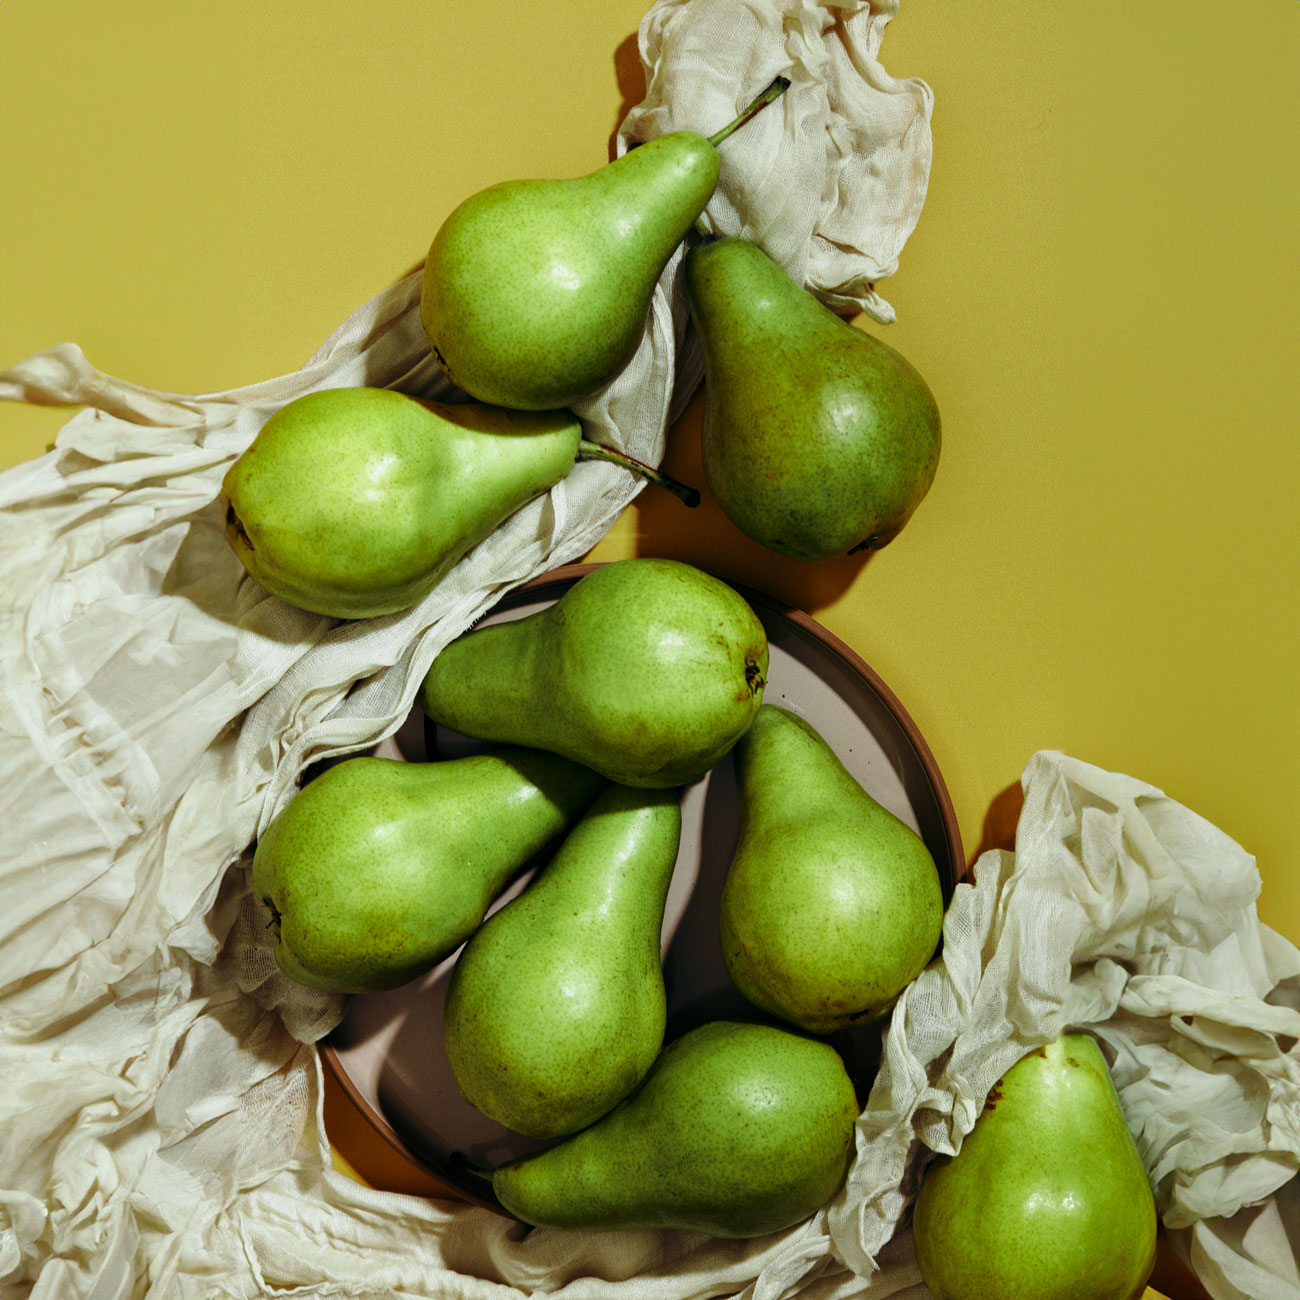 Lush green pears artfully arranged on and around a plate, interspersed with crinkled white cloth, against a mustard yellow backdrop.